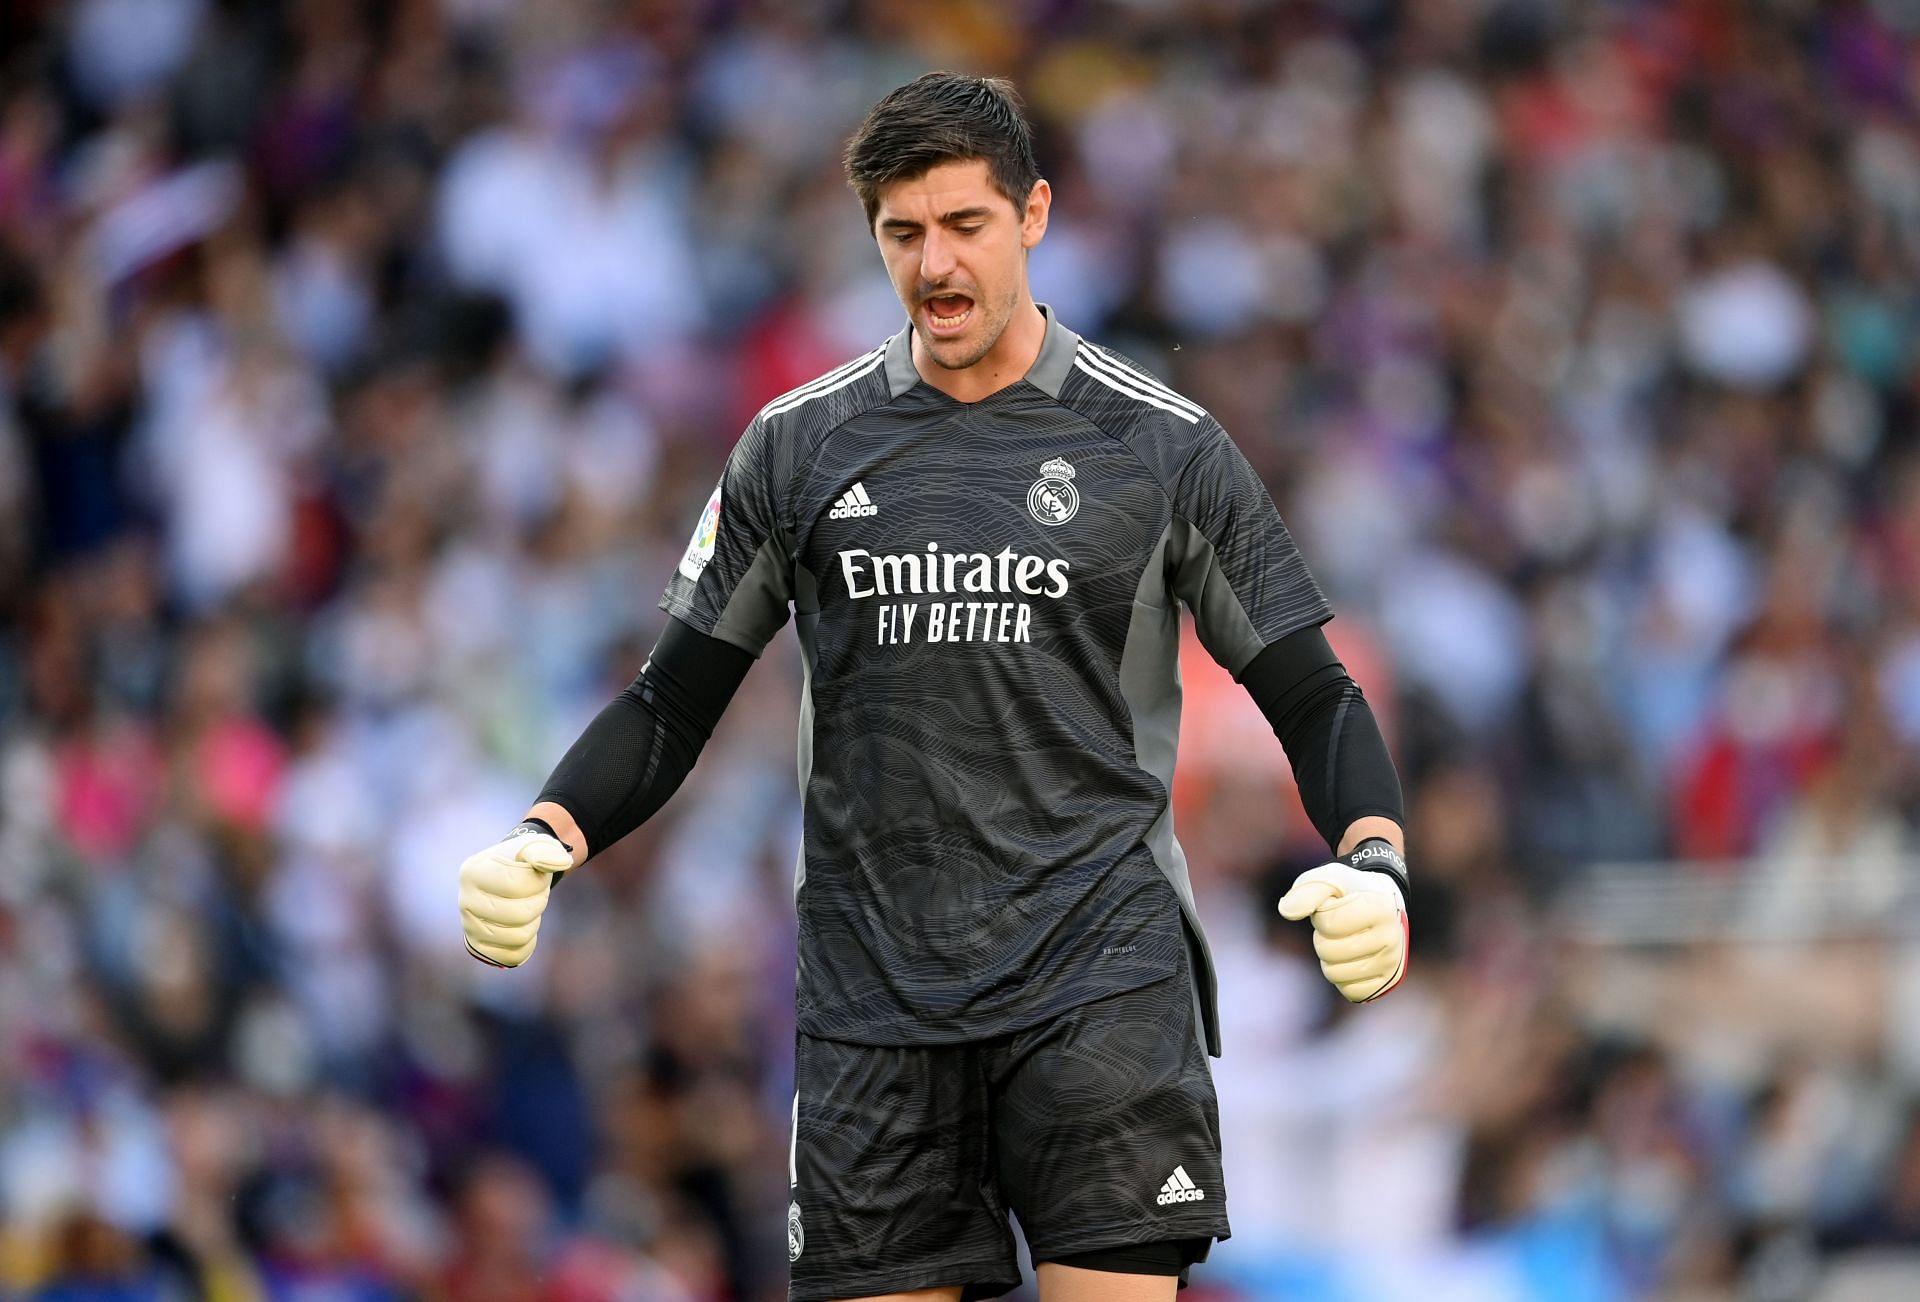 Thibaut Courtois impressed for Real Madrid and the Belgian team in 2021.